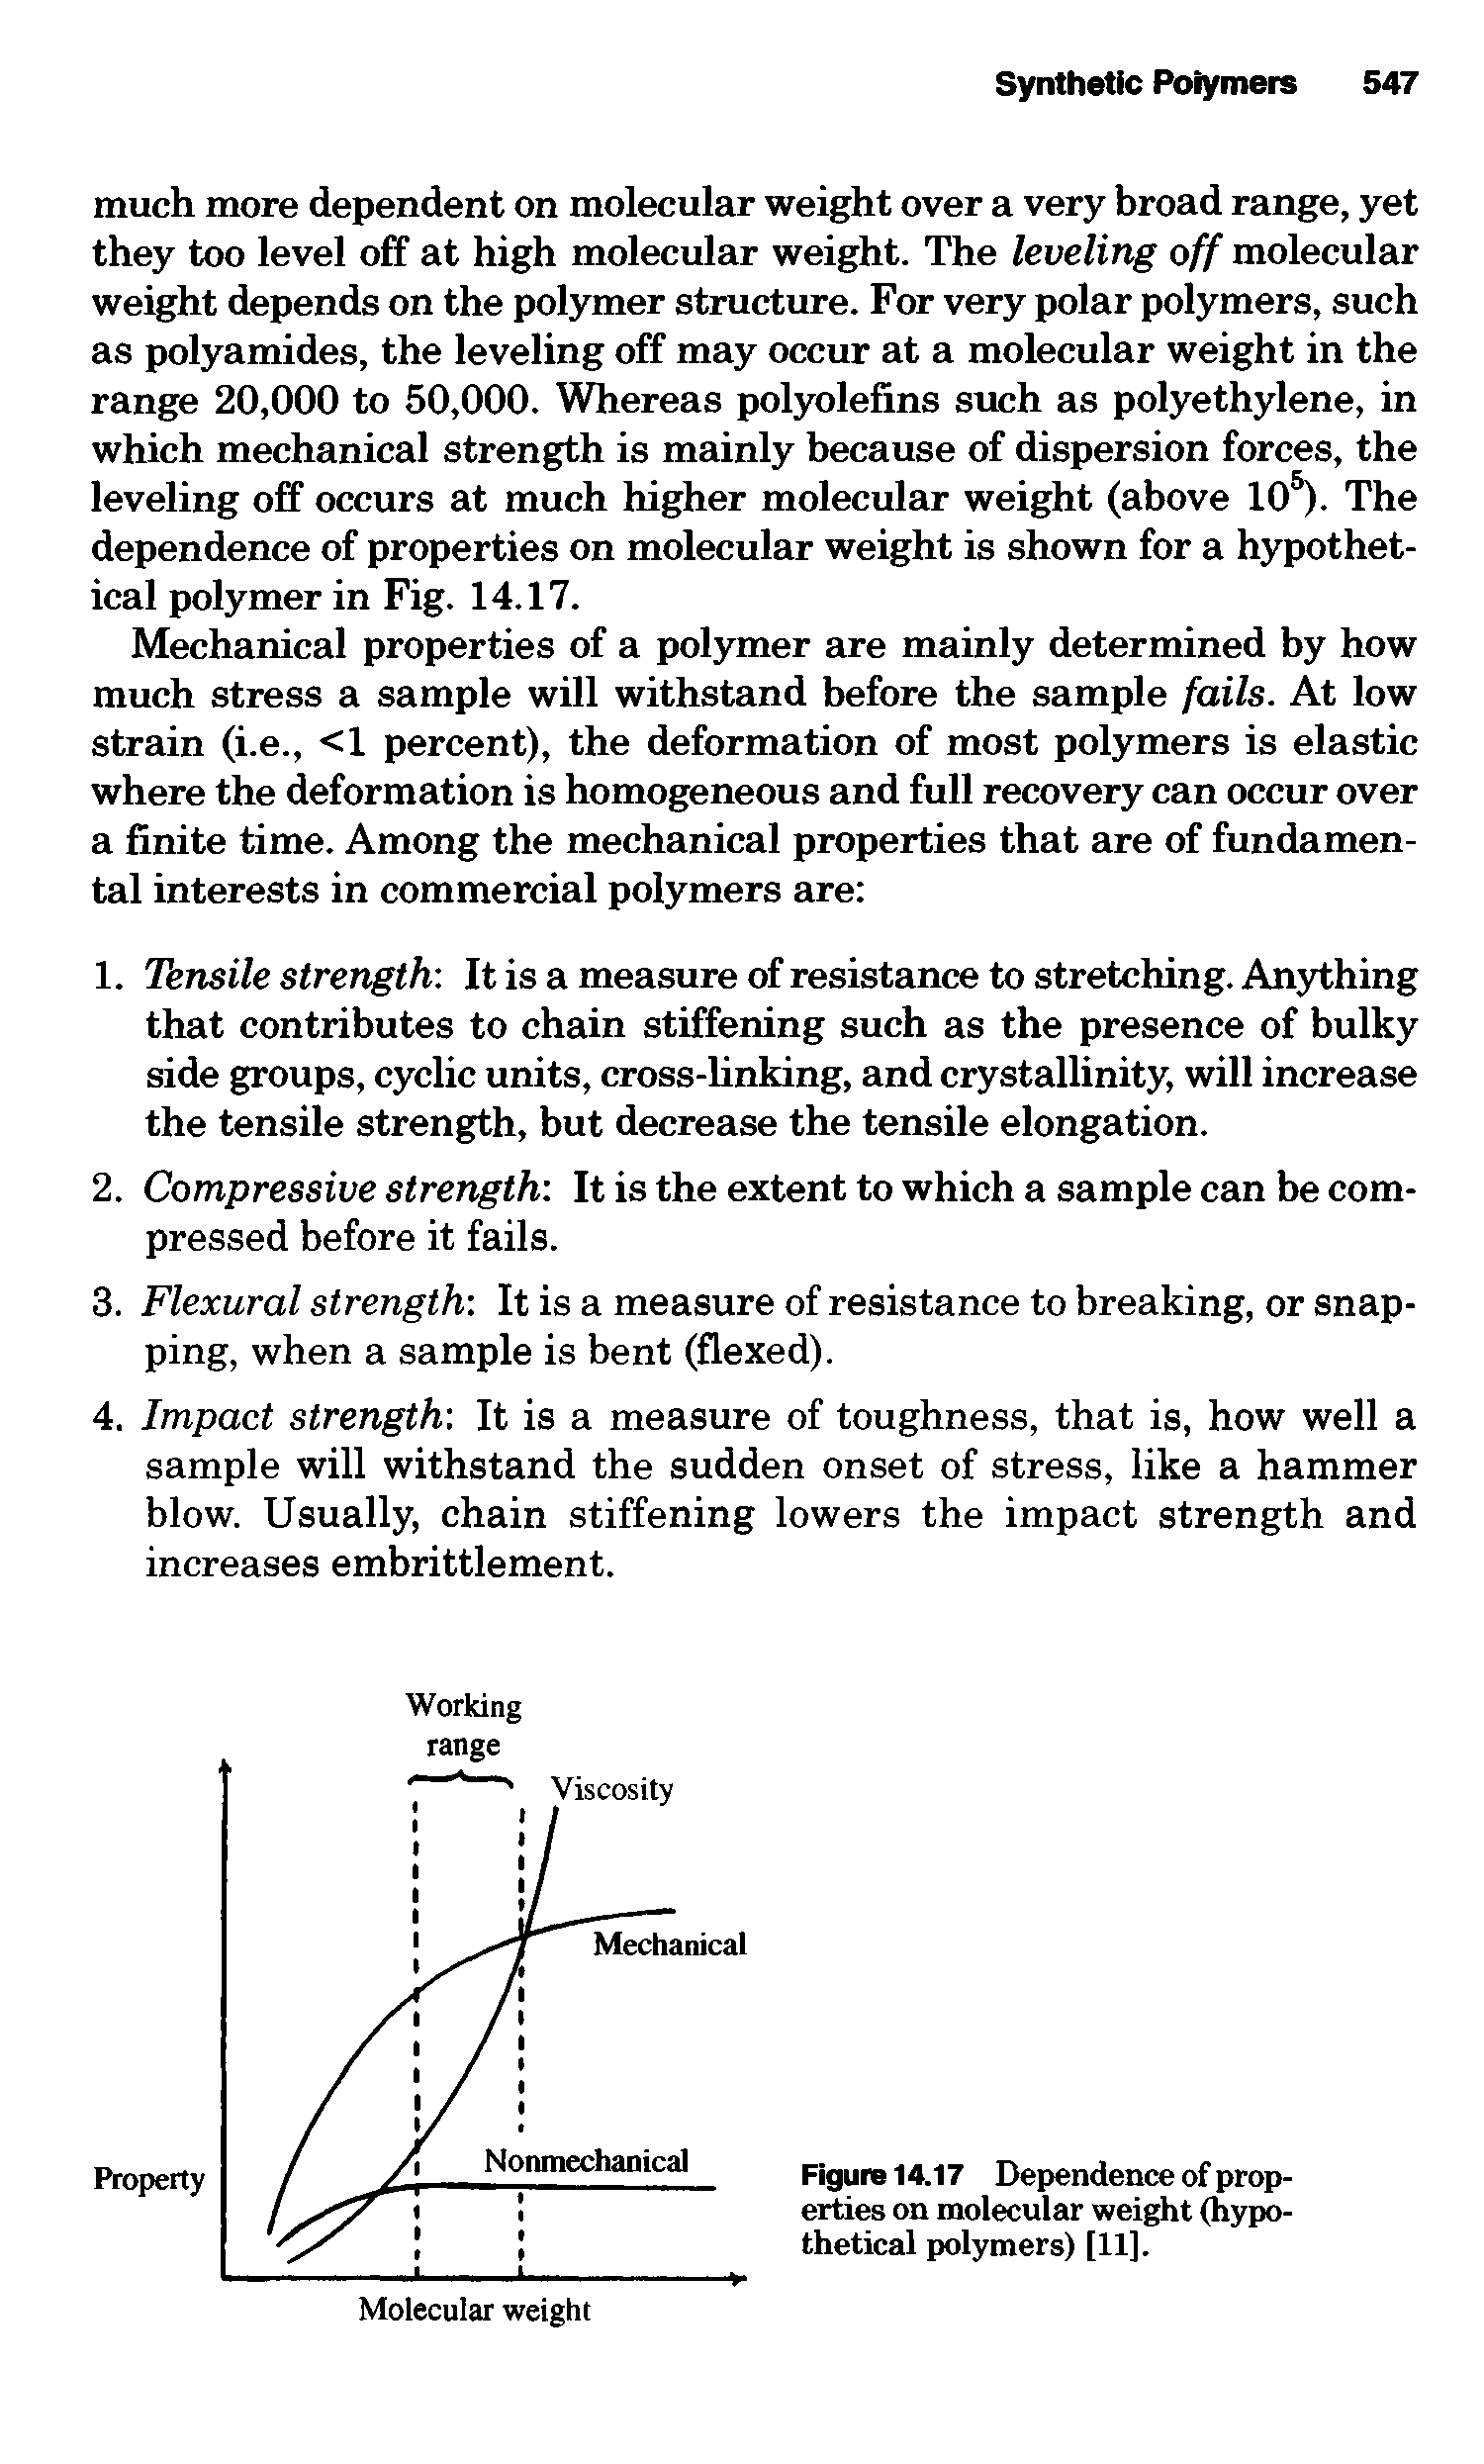 Figure 14.17 Dependence of properties on molecular weight (hypothetical polymers) [11].